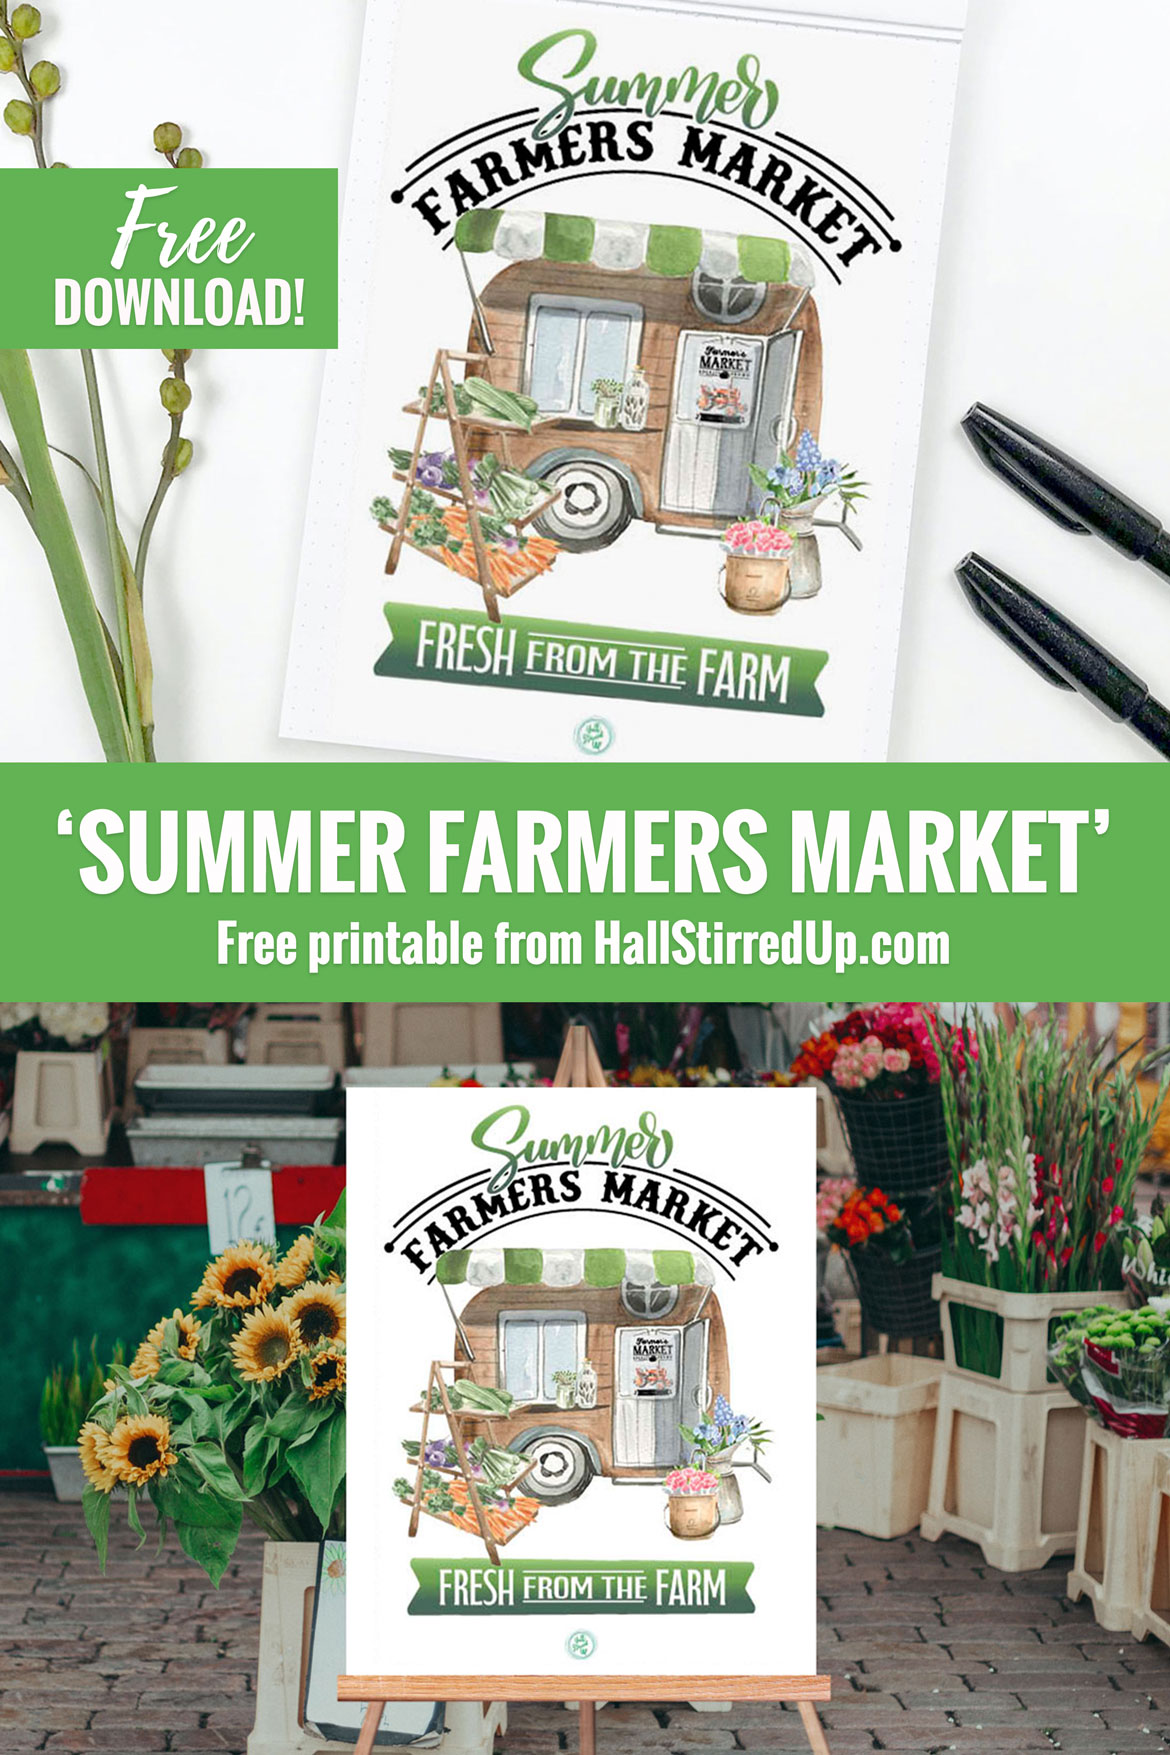 Download a free Summer Farmer's Market printable